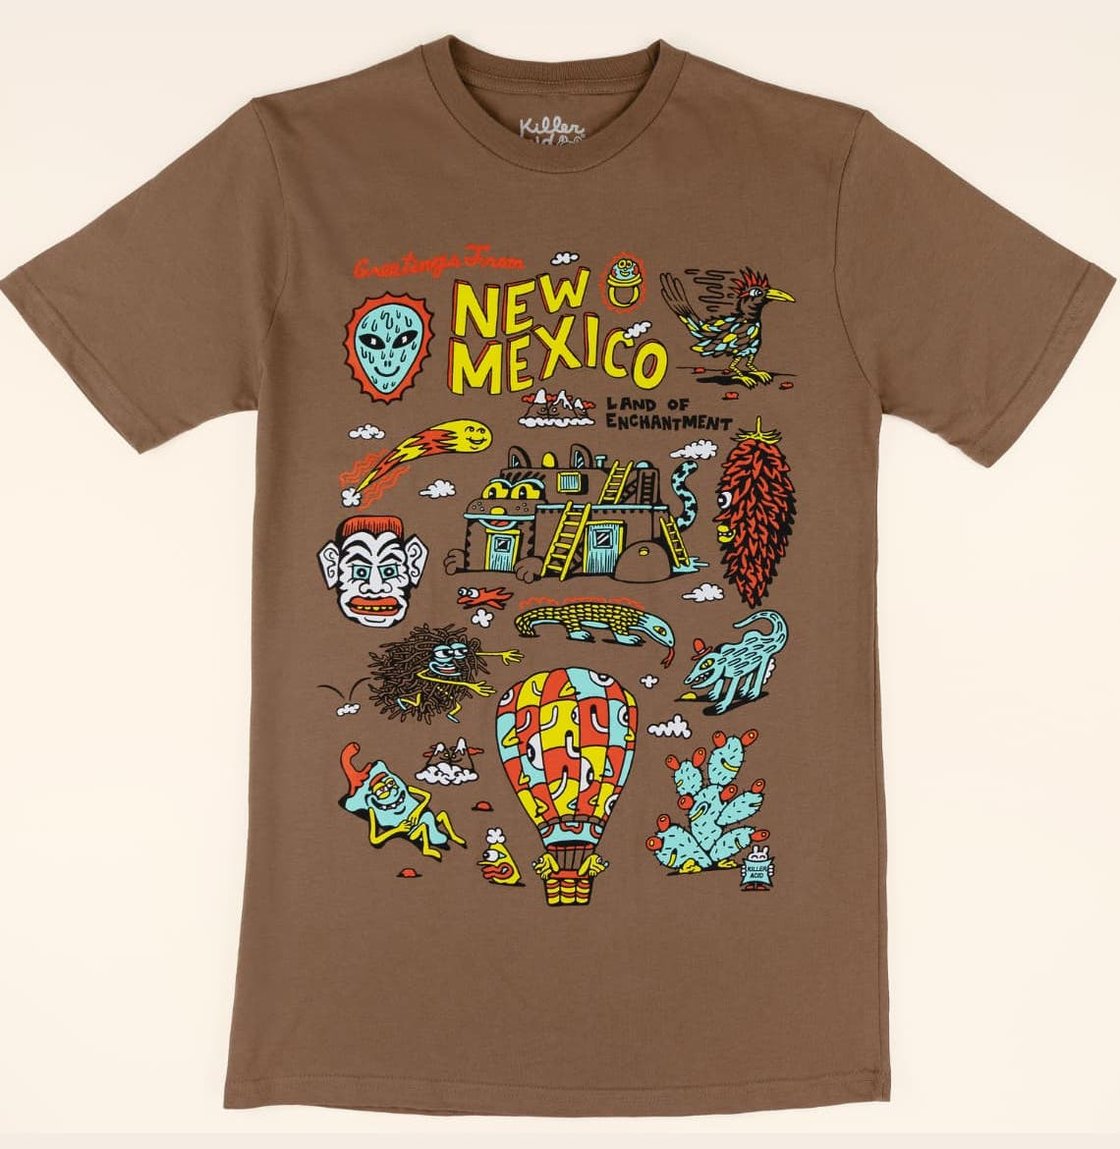 brown shirt with illustrations of New Mexico-based things like prickly pear cactus and Zozobra